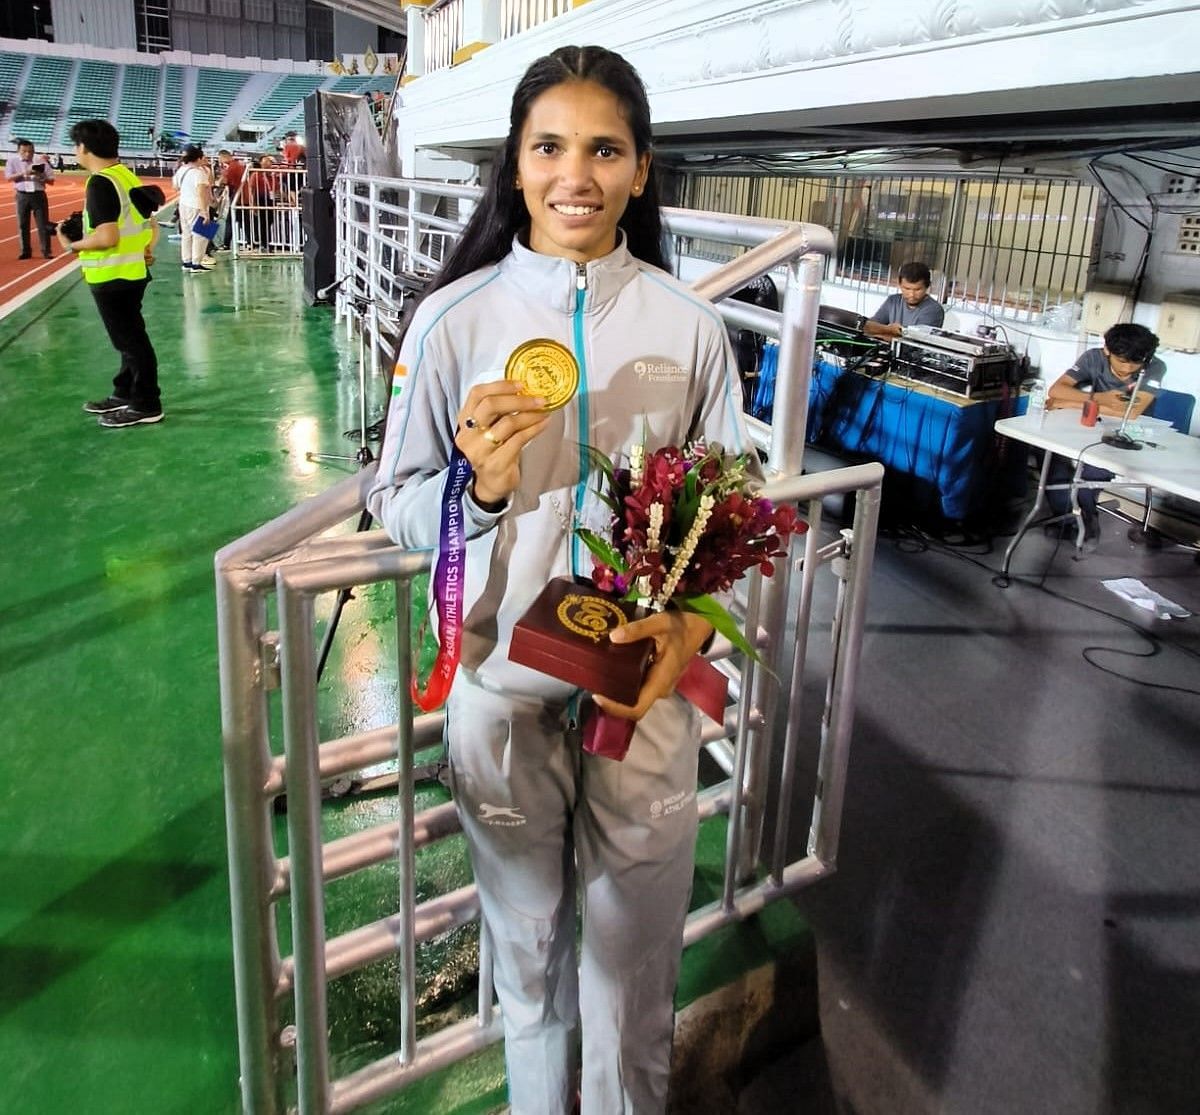 Jyothi Yarraji, 100m hurdles specialist and Asian medallist will compete at the Indian Grand Prix 5 in Chandigarh scheduled to be held on September 10 and 11. File photo: Credit AFI.